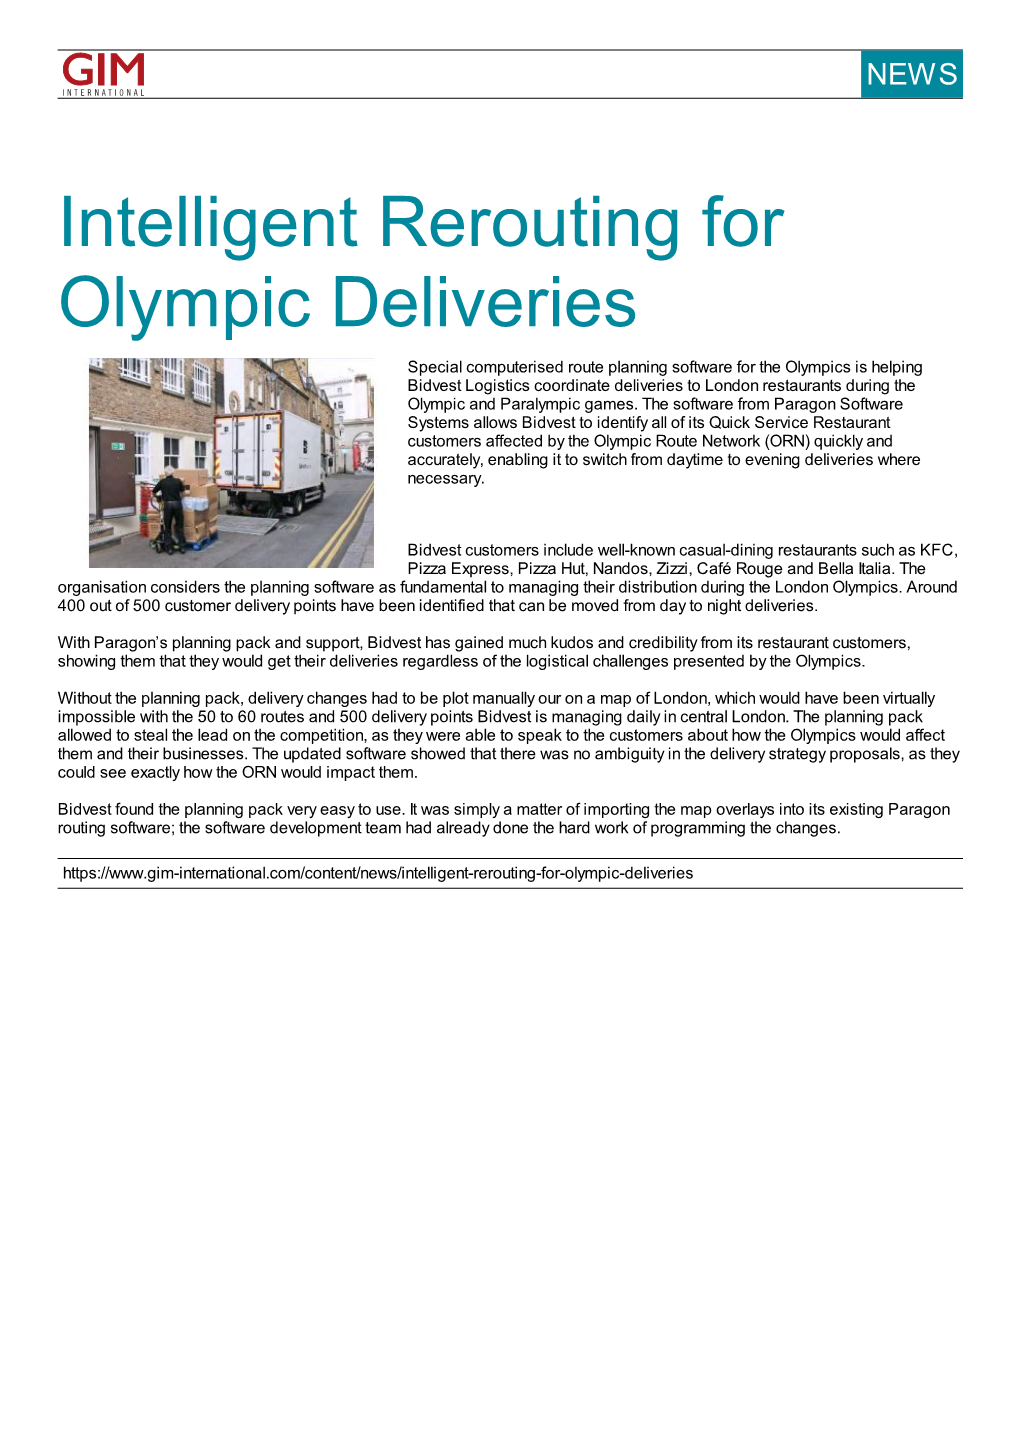 Intelligent Rerouting for Olympic Deliveries